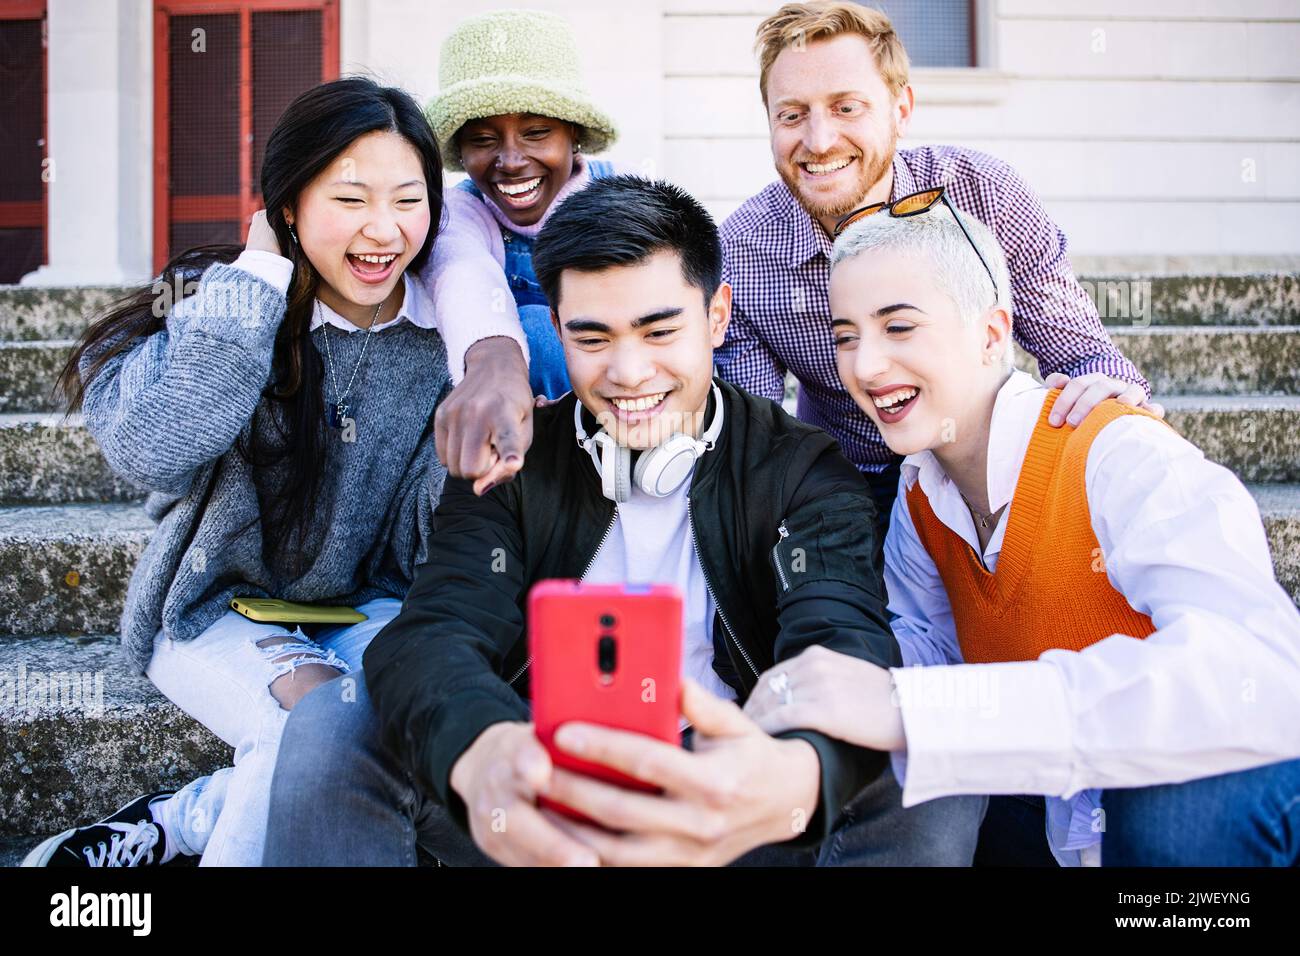 Happy group of young people having fun using mobile phone together outdoors Stock Photo